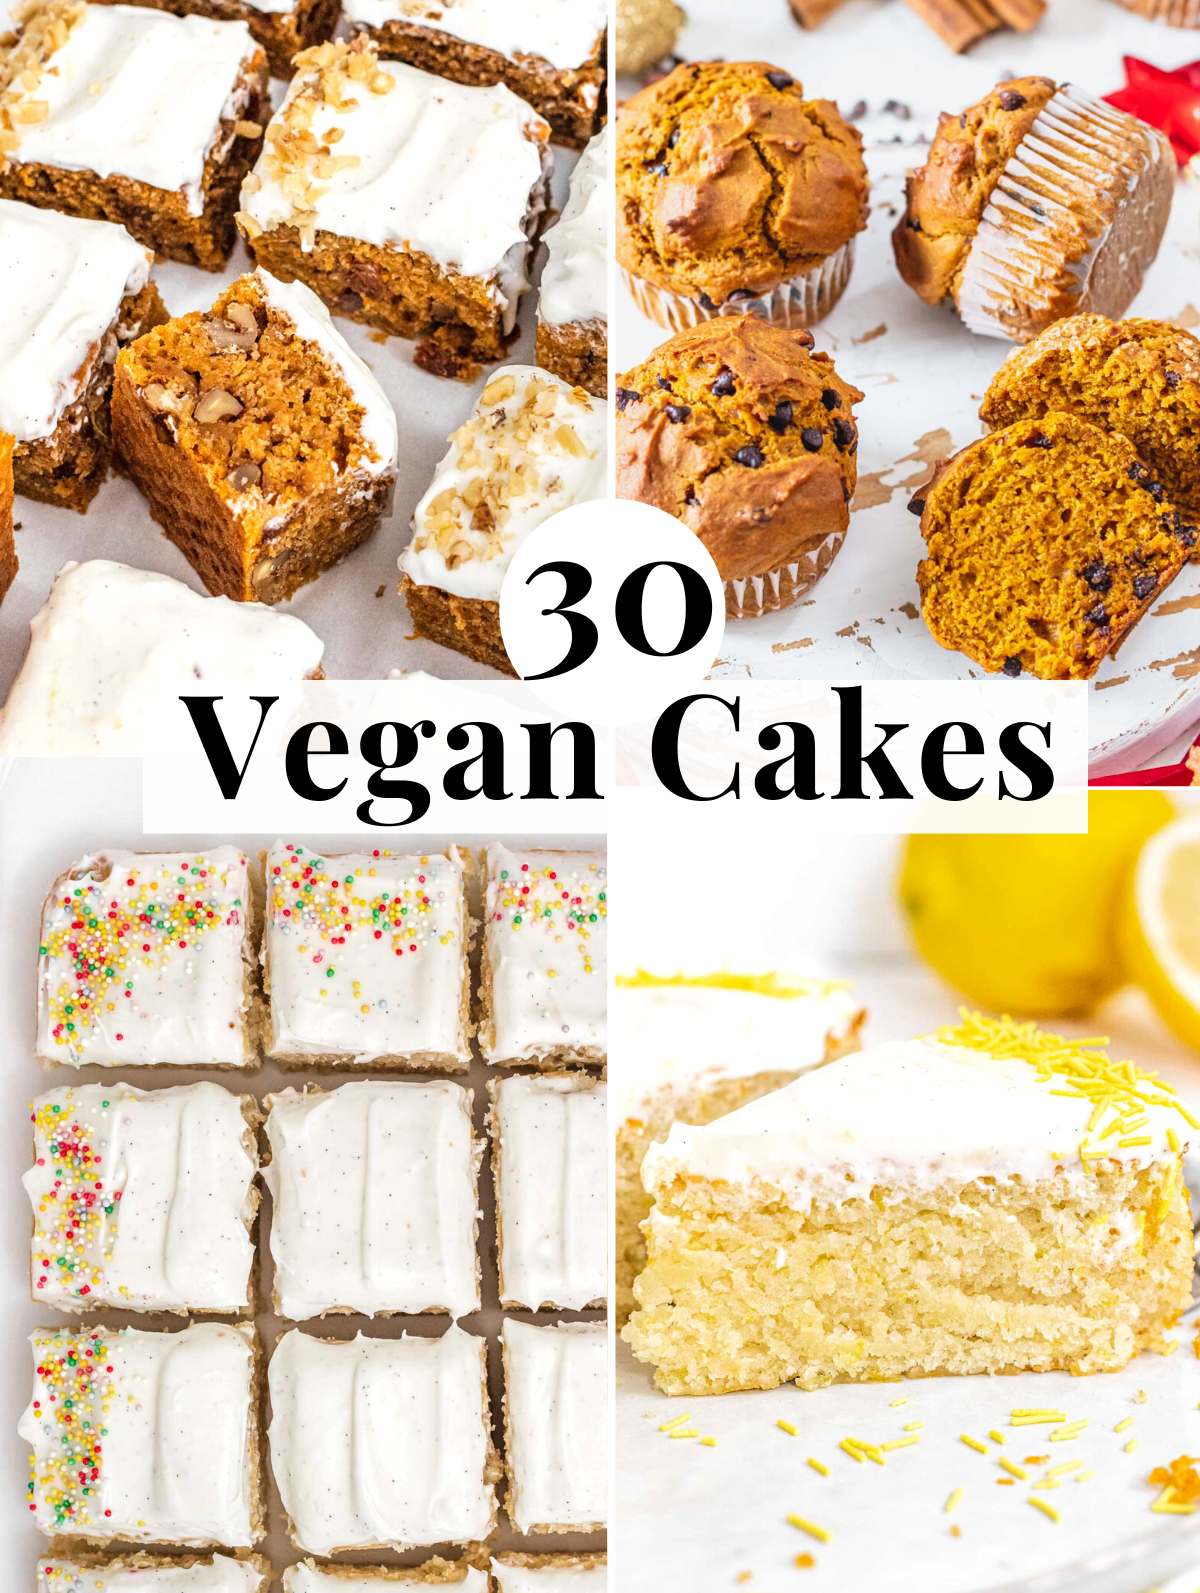 Vegan cakes with frosting and glazing